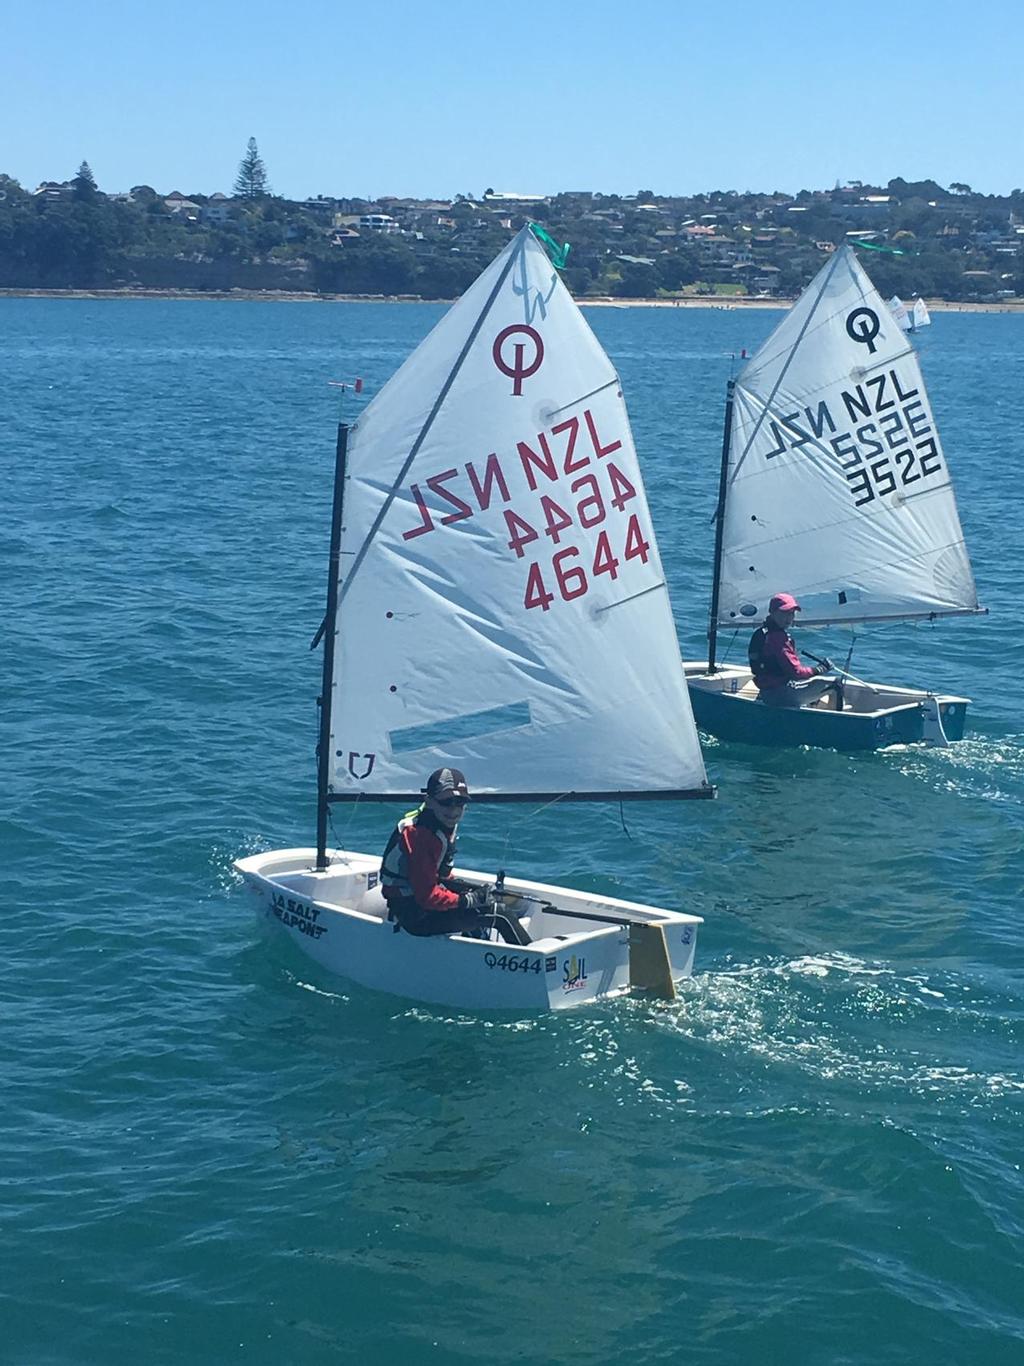 Optimists race in racing and Learn To Sail fleets at Pt Chevalier Sailing Club © Point Chevalier SC